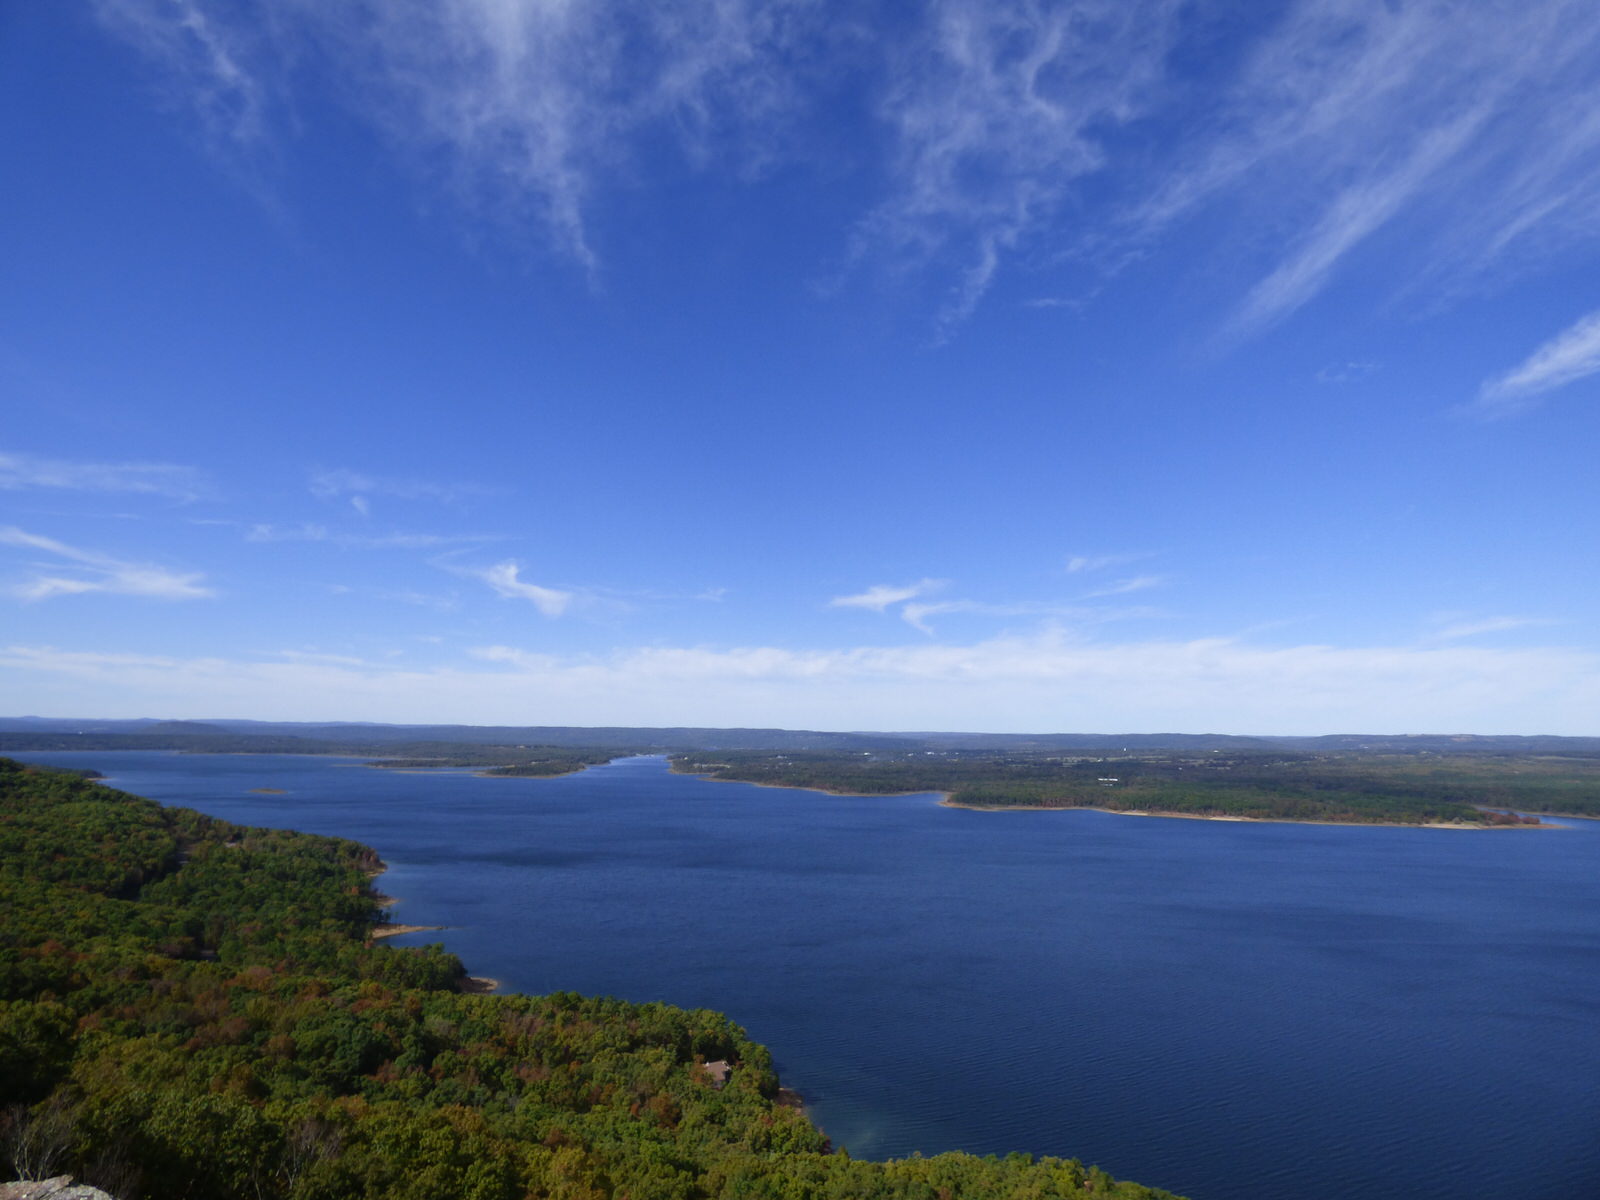  Own a Vacation Home on  Greers Ferry Lake  or  Little Red River?&nbsp;  View our Services  